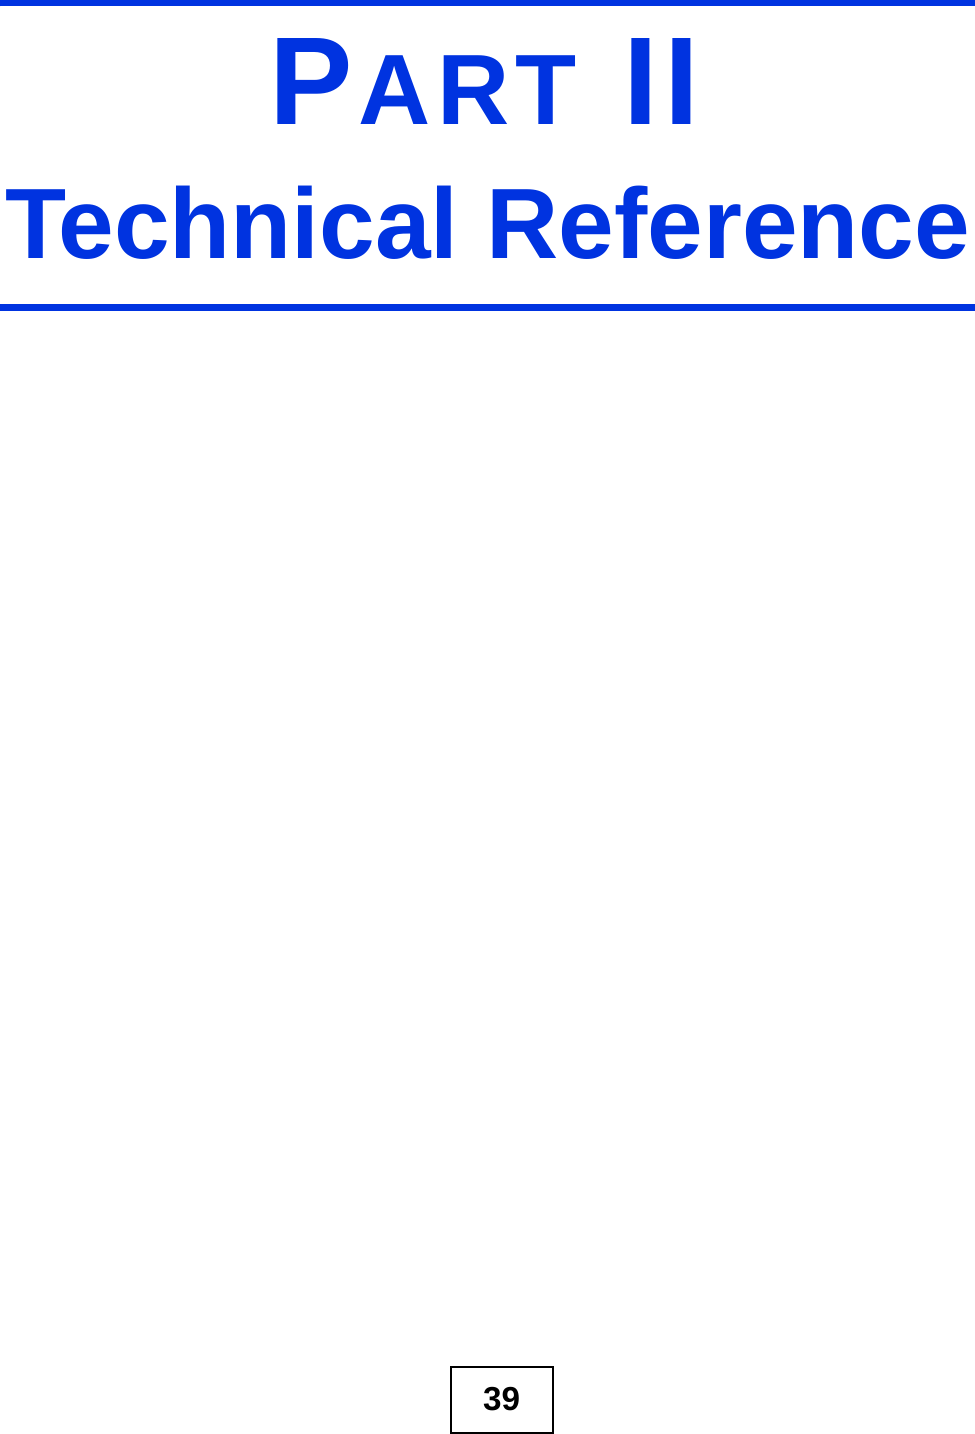 39PART IITechnical Reference